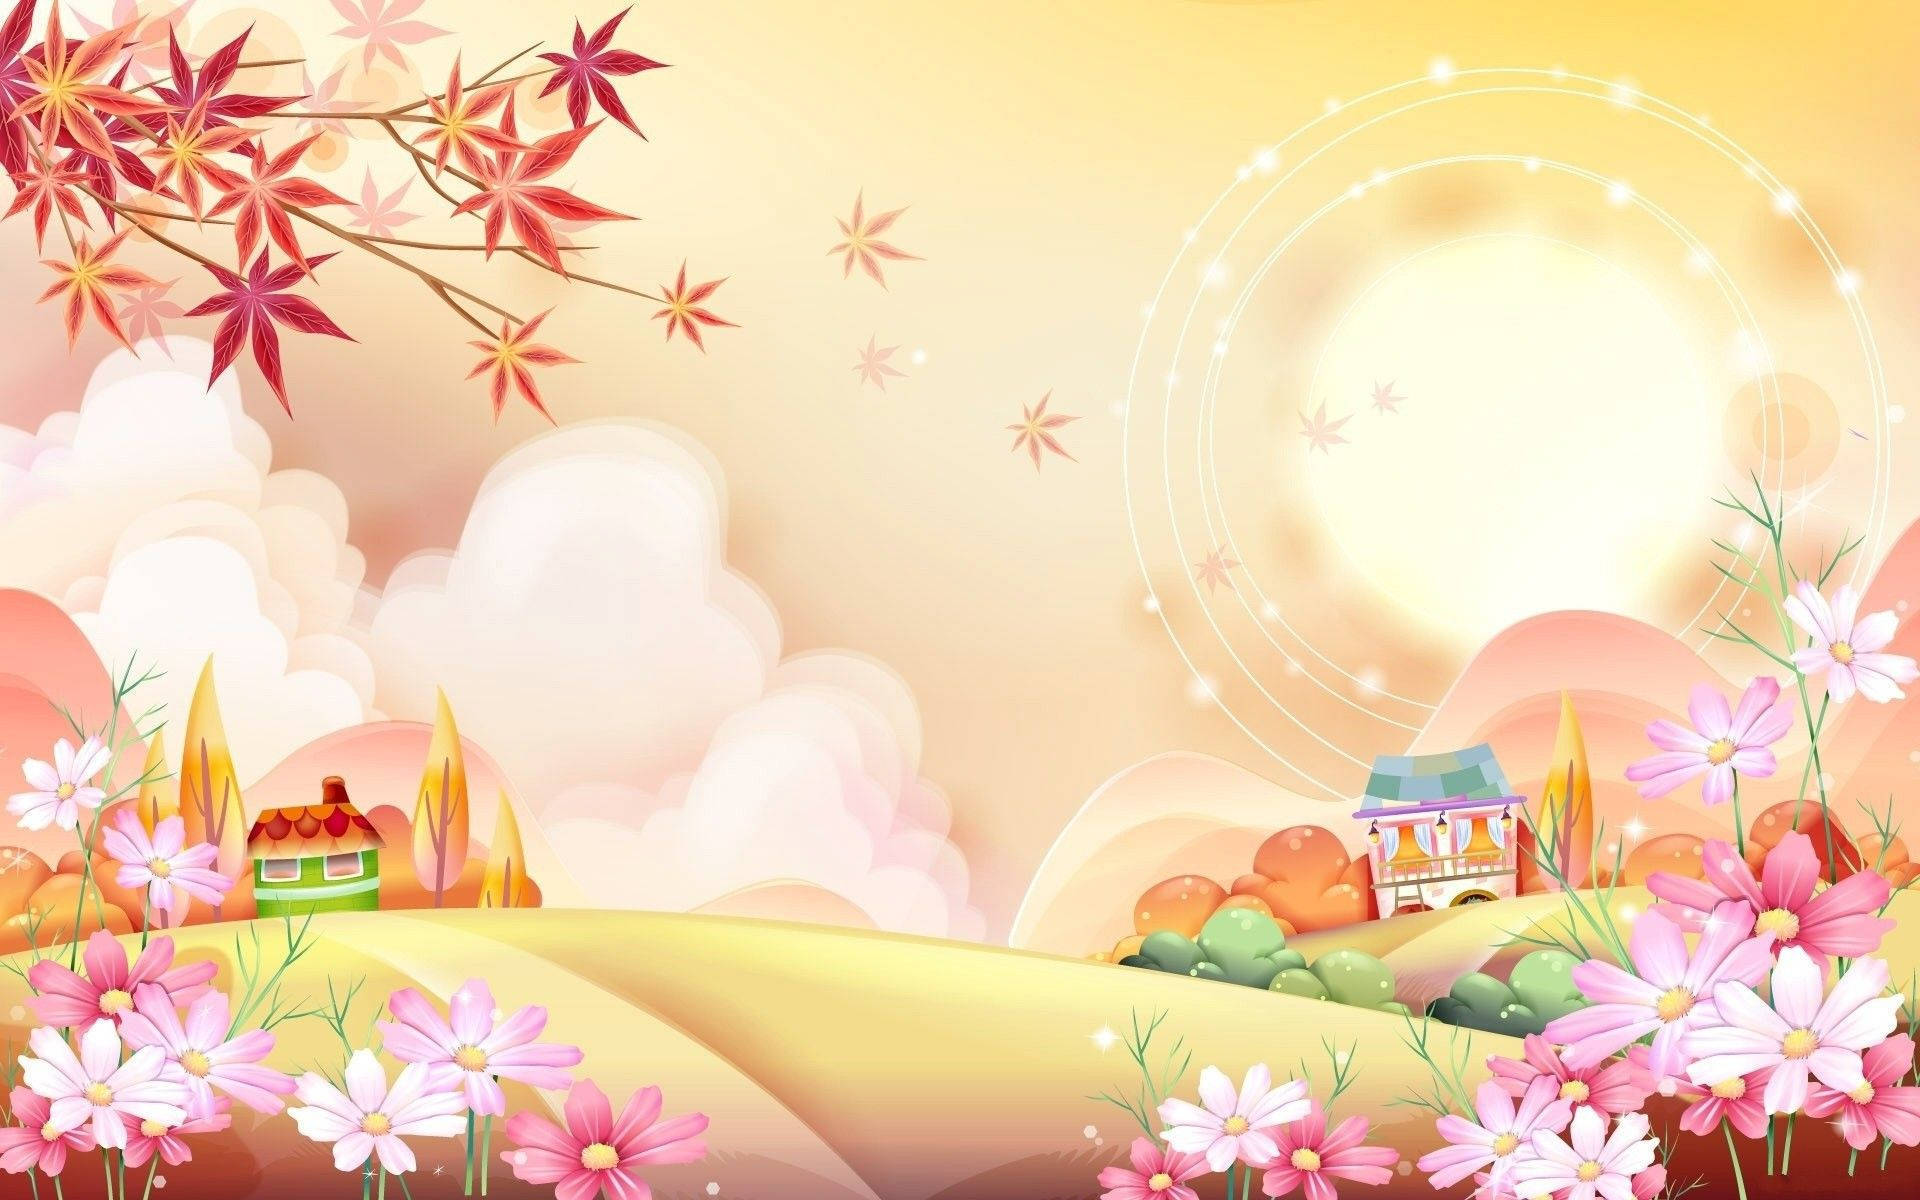 Cute Cartoon Image Of Houses Background